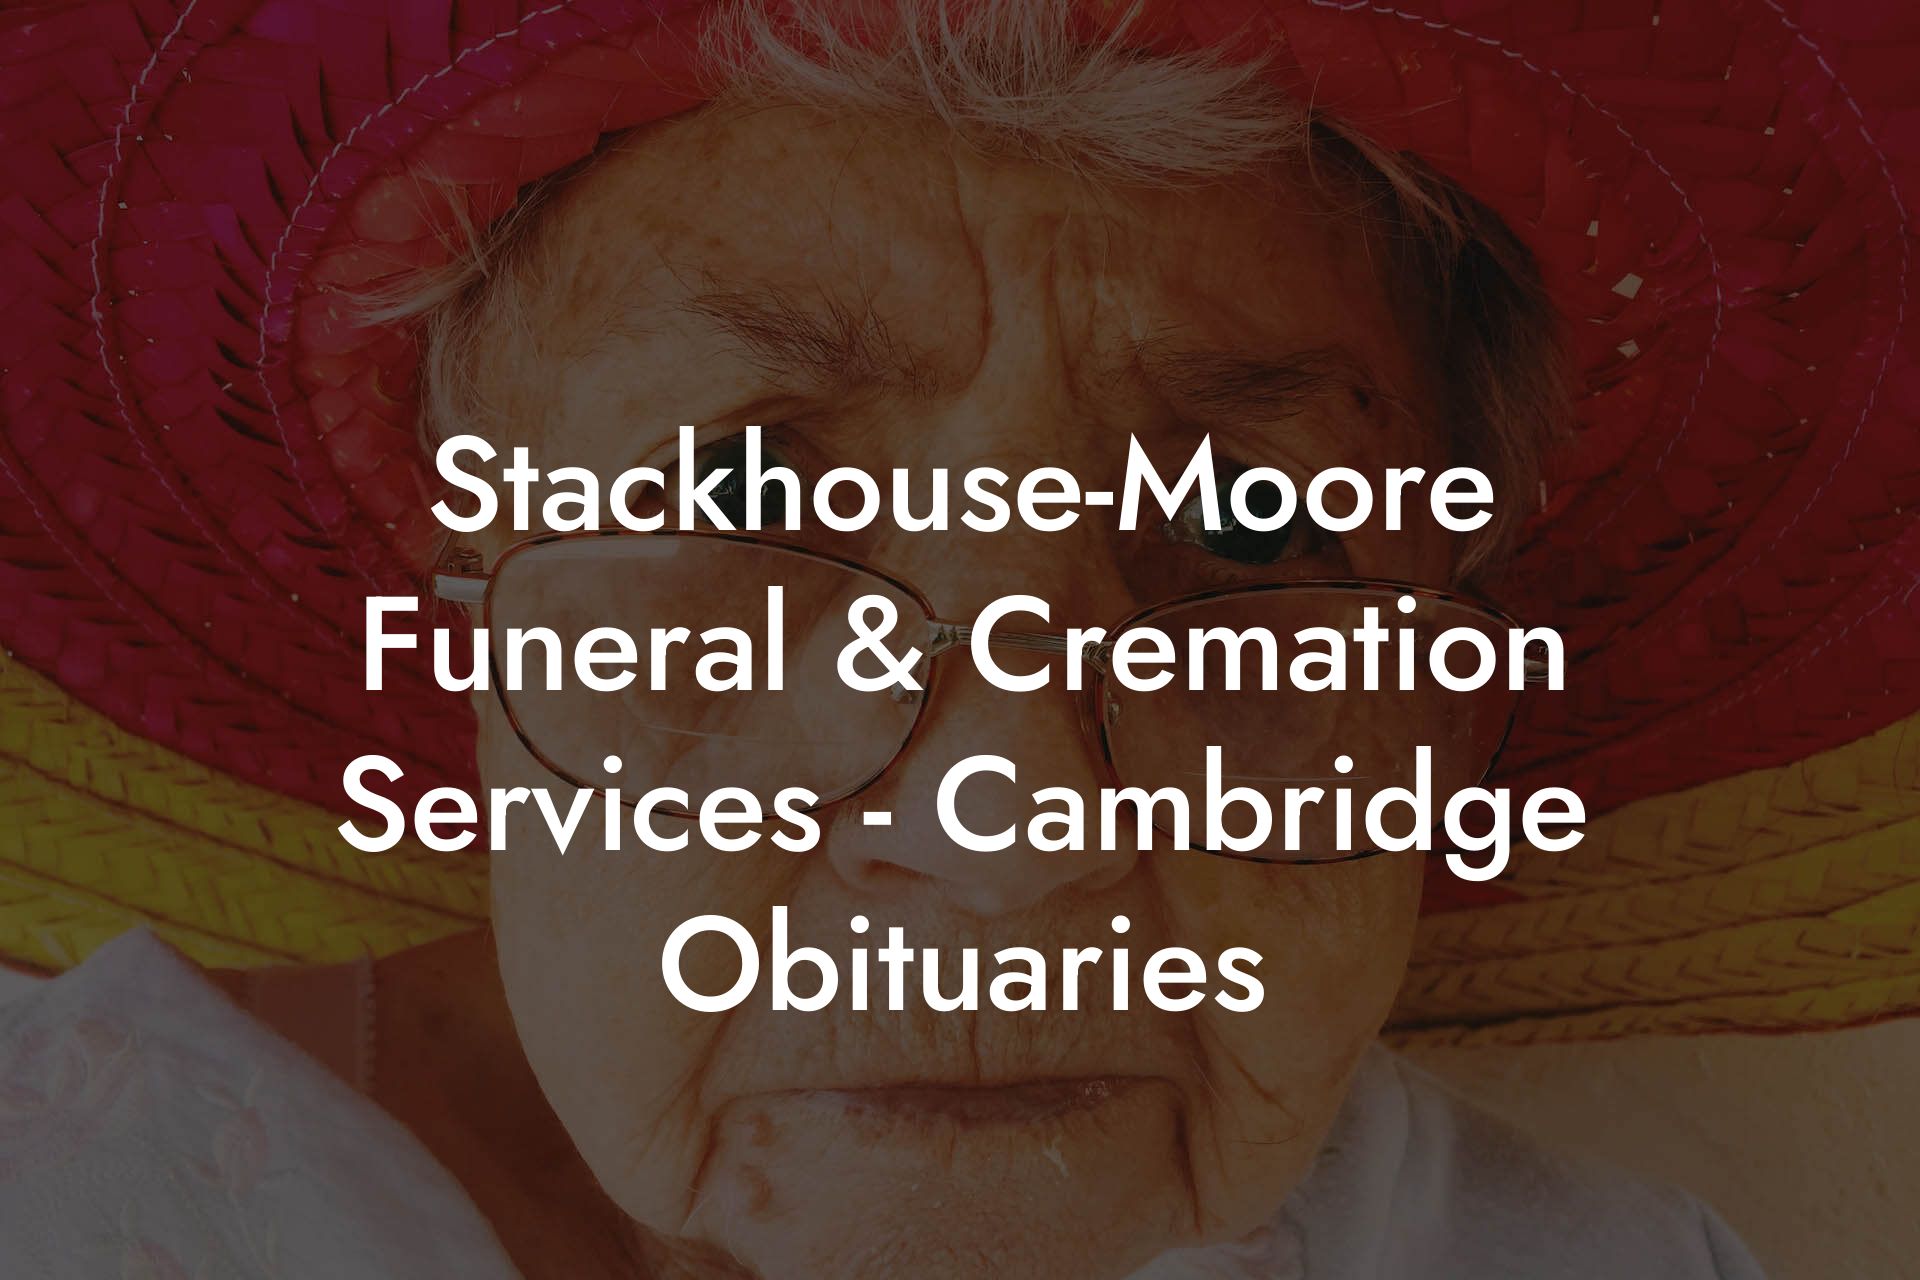 Stackhouse-Moore Funeral & Cremation Services - Cambridge Obituaries